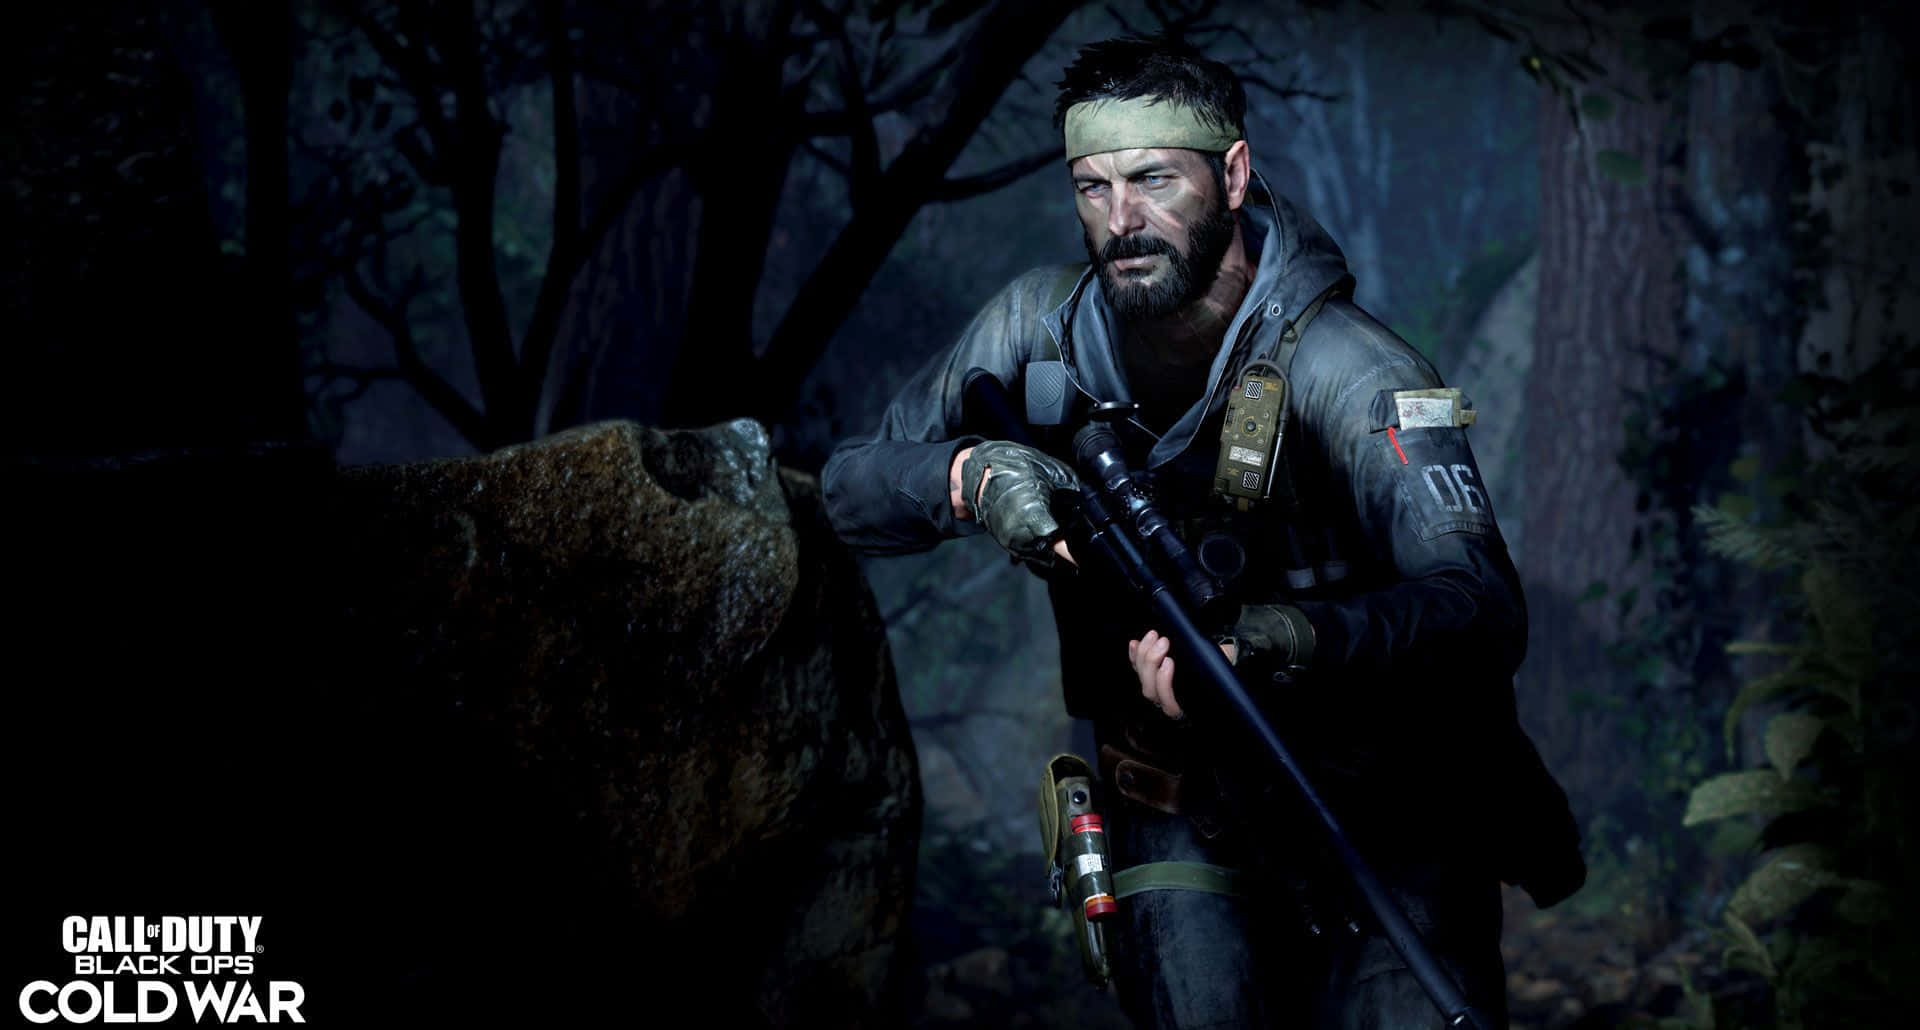 Experience the Cold War in thrilling Call Of Duty: Black Ops missions